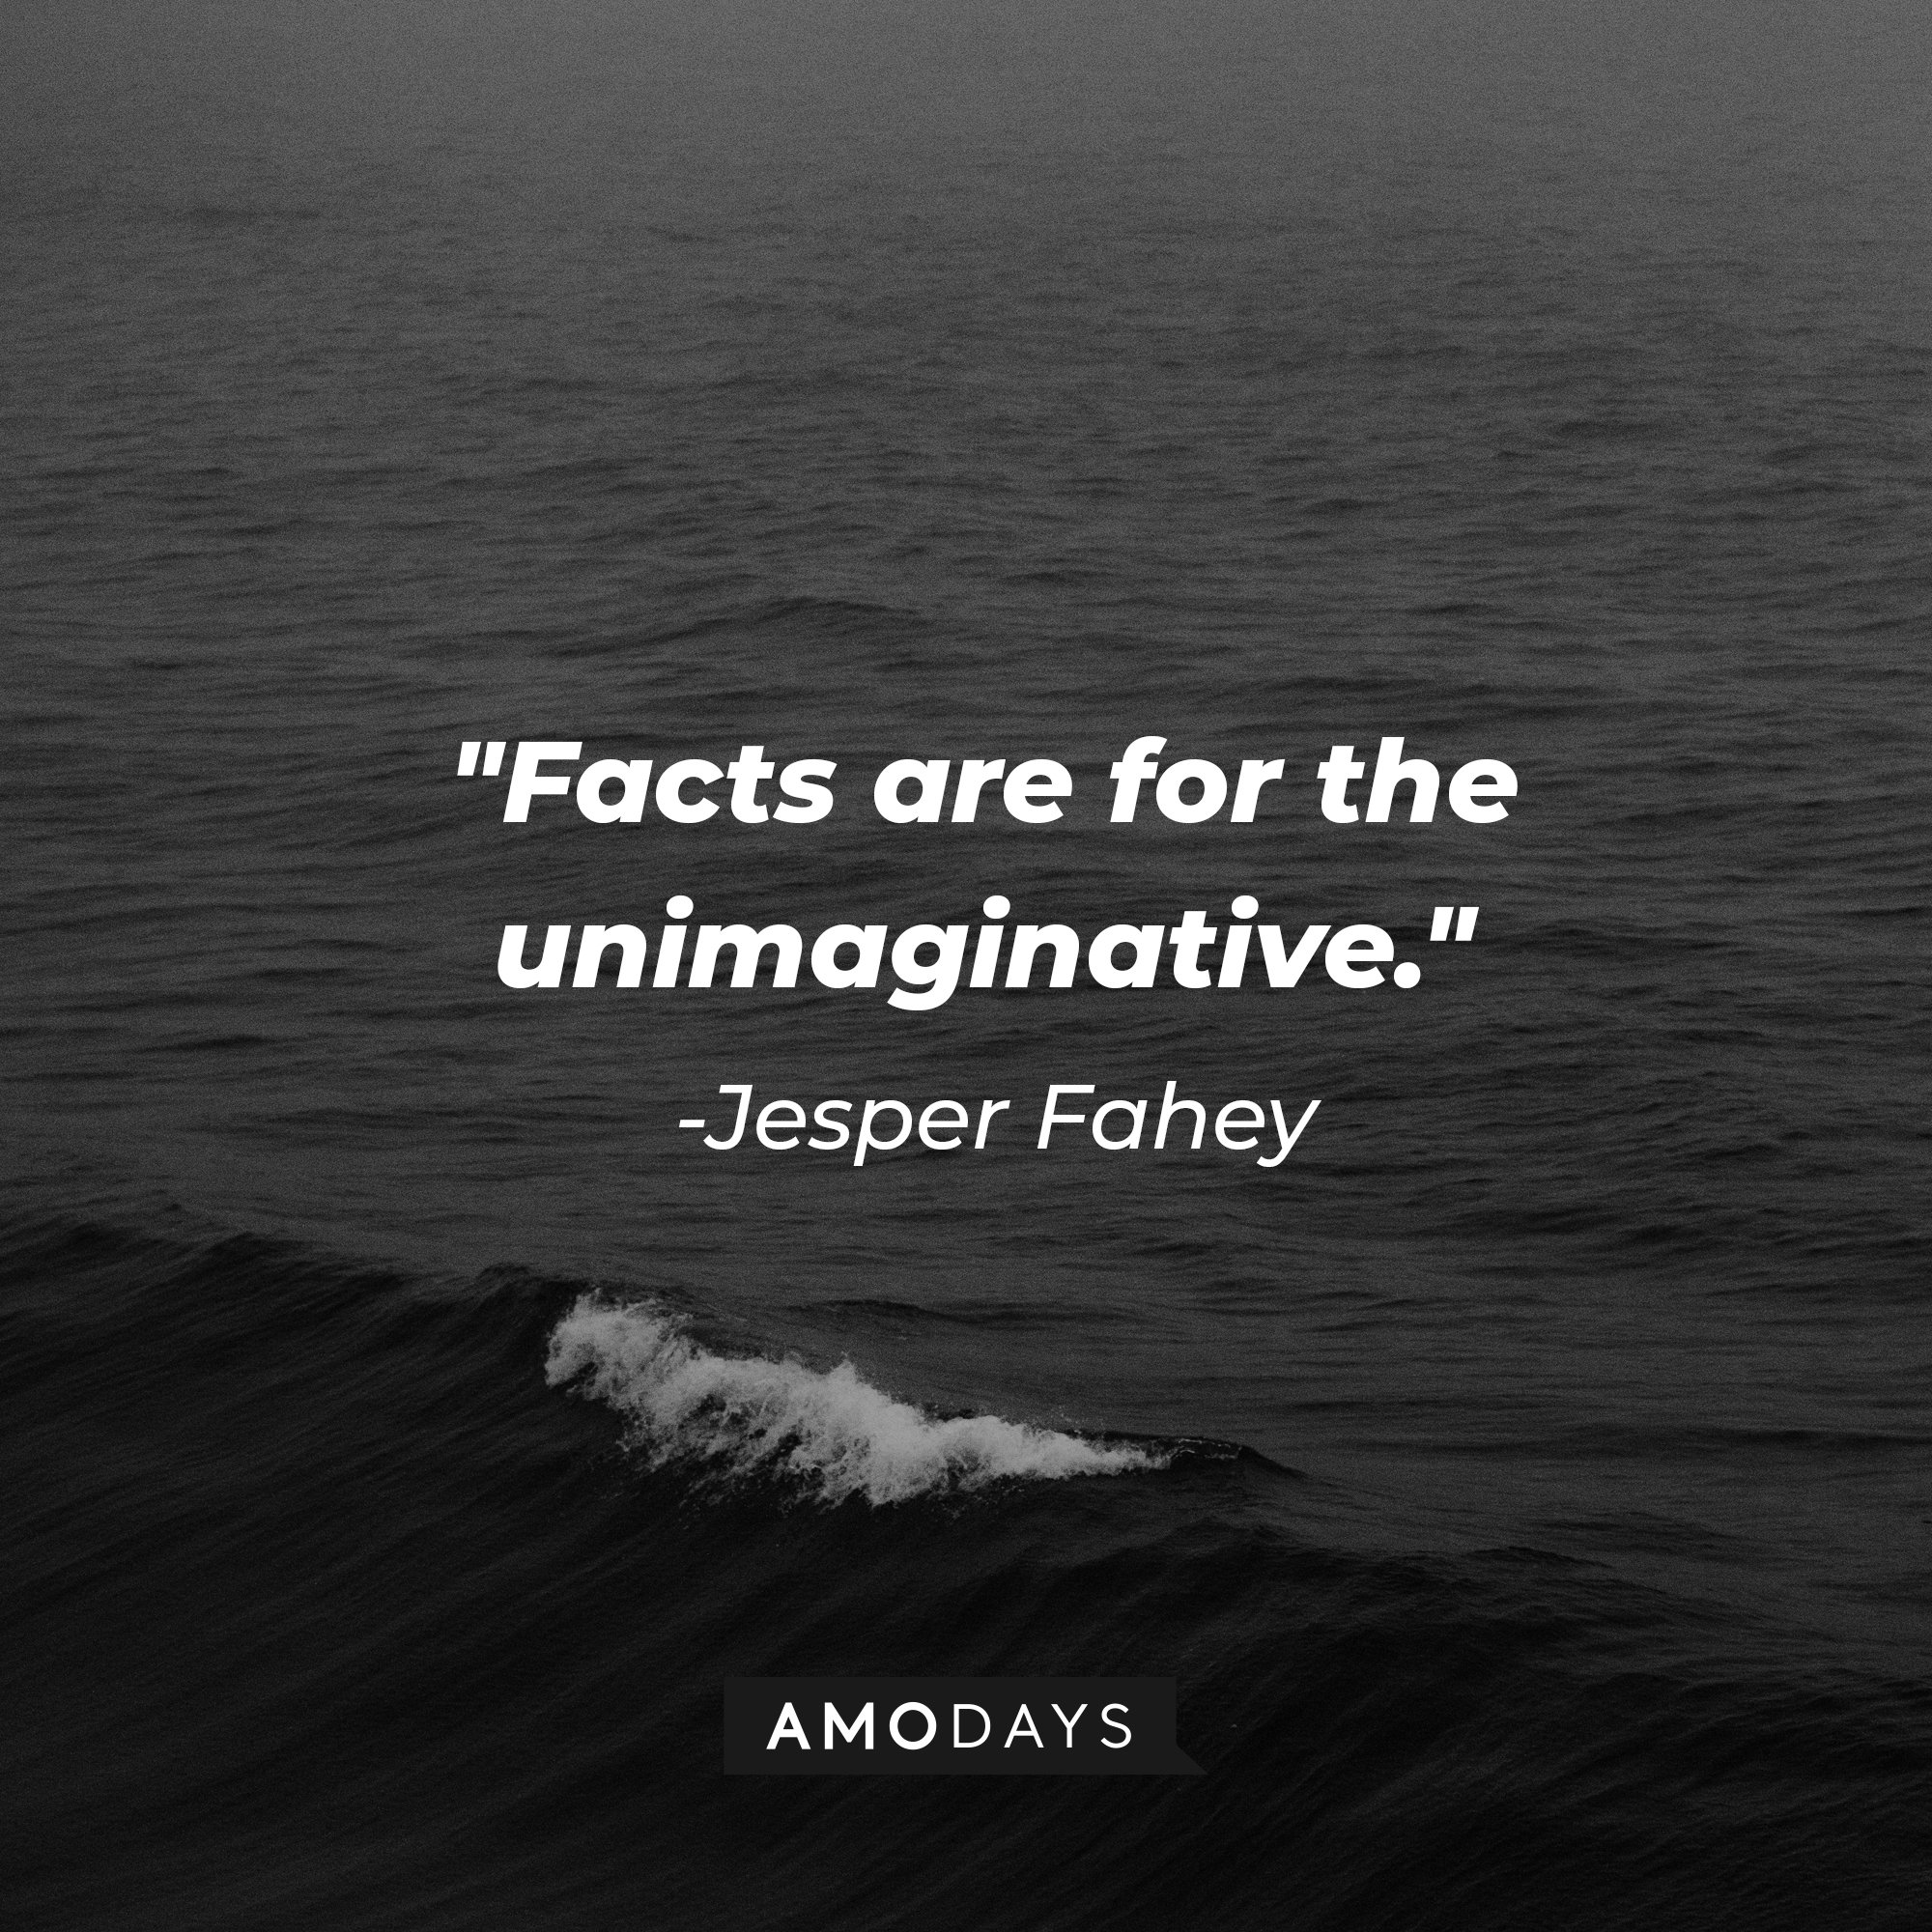 Jesper Fahey’s quote: "Facts are for the unimaginative." | Image: AmoDays